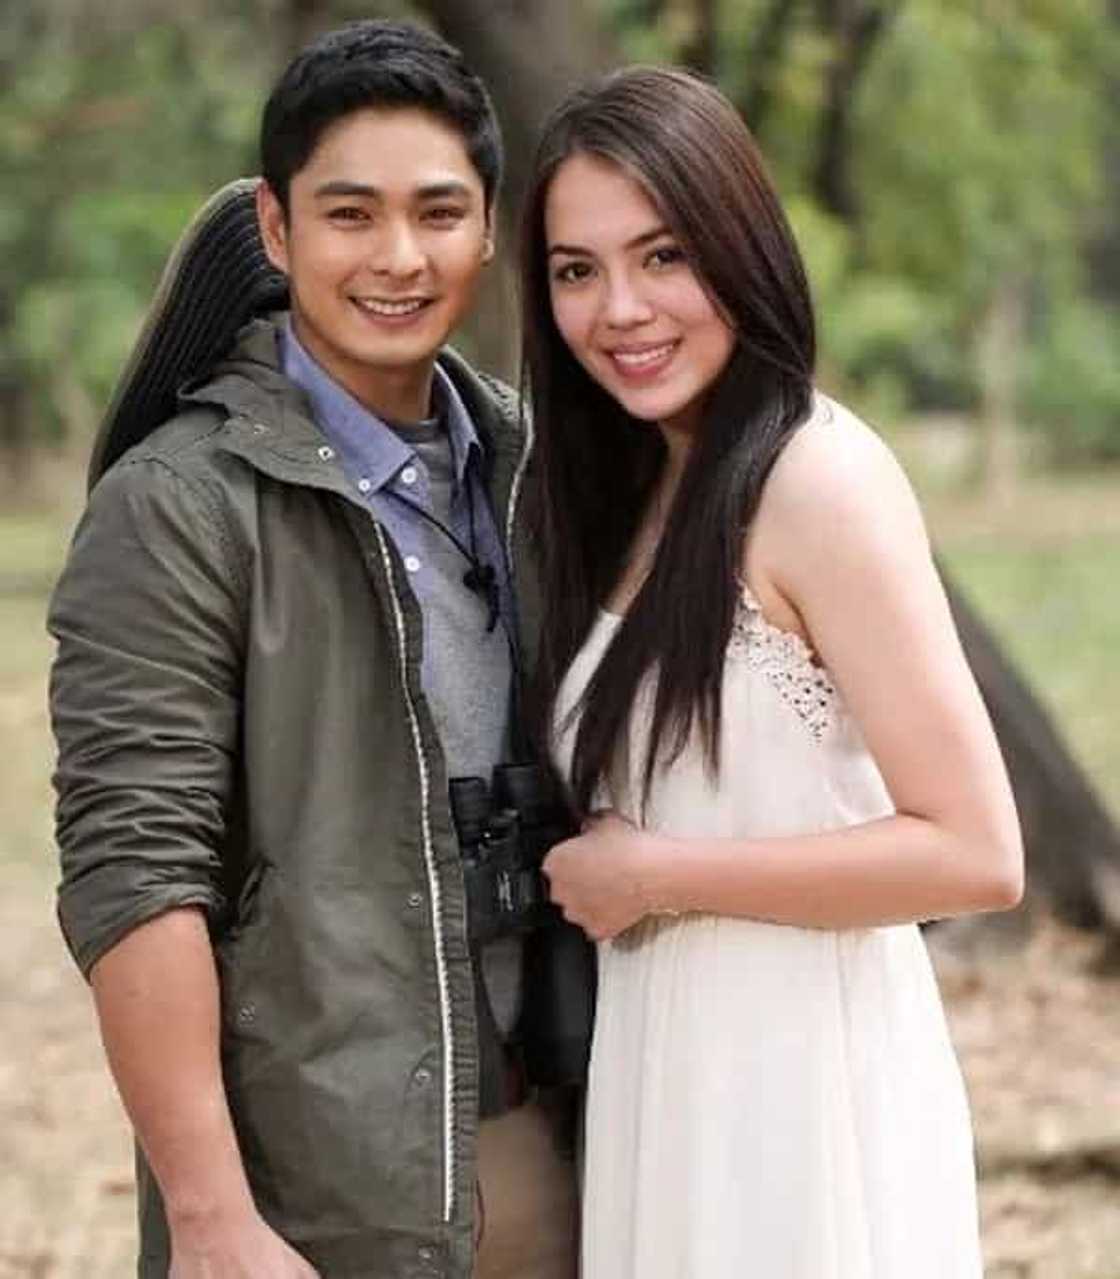 Are Coco Martin and Julia Montes meeting secretly?